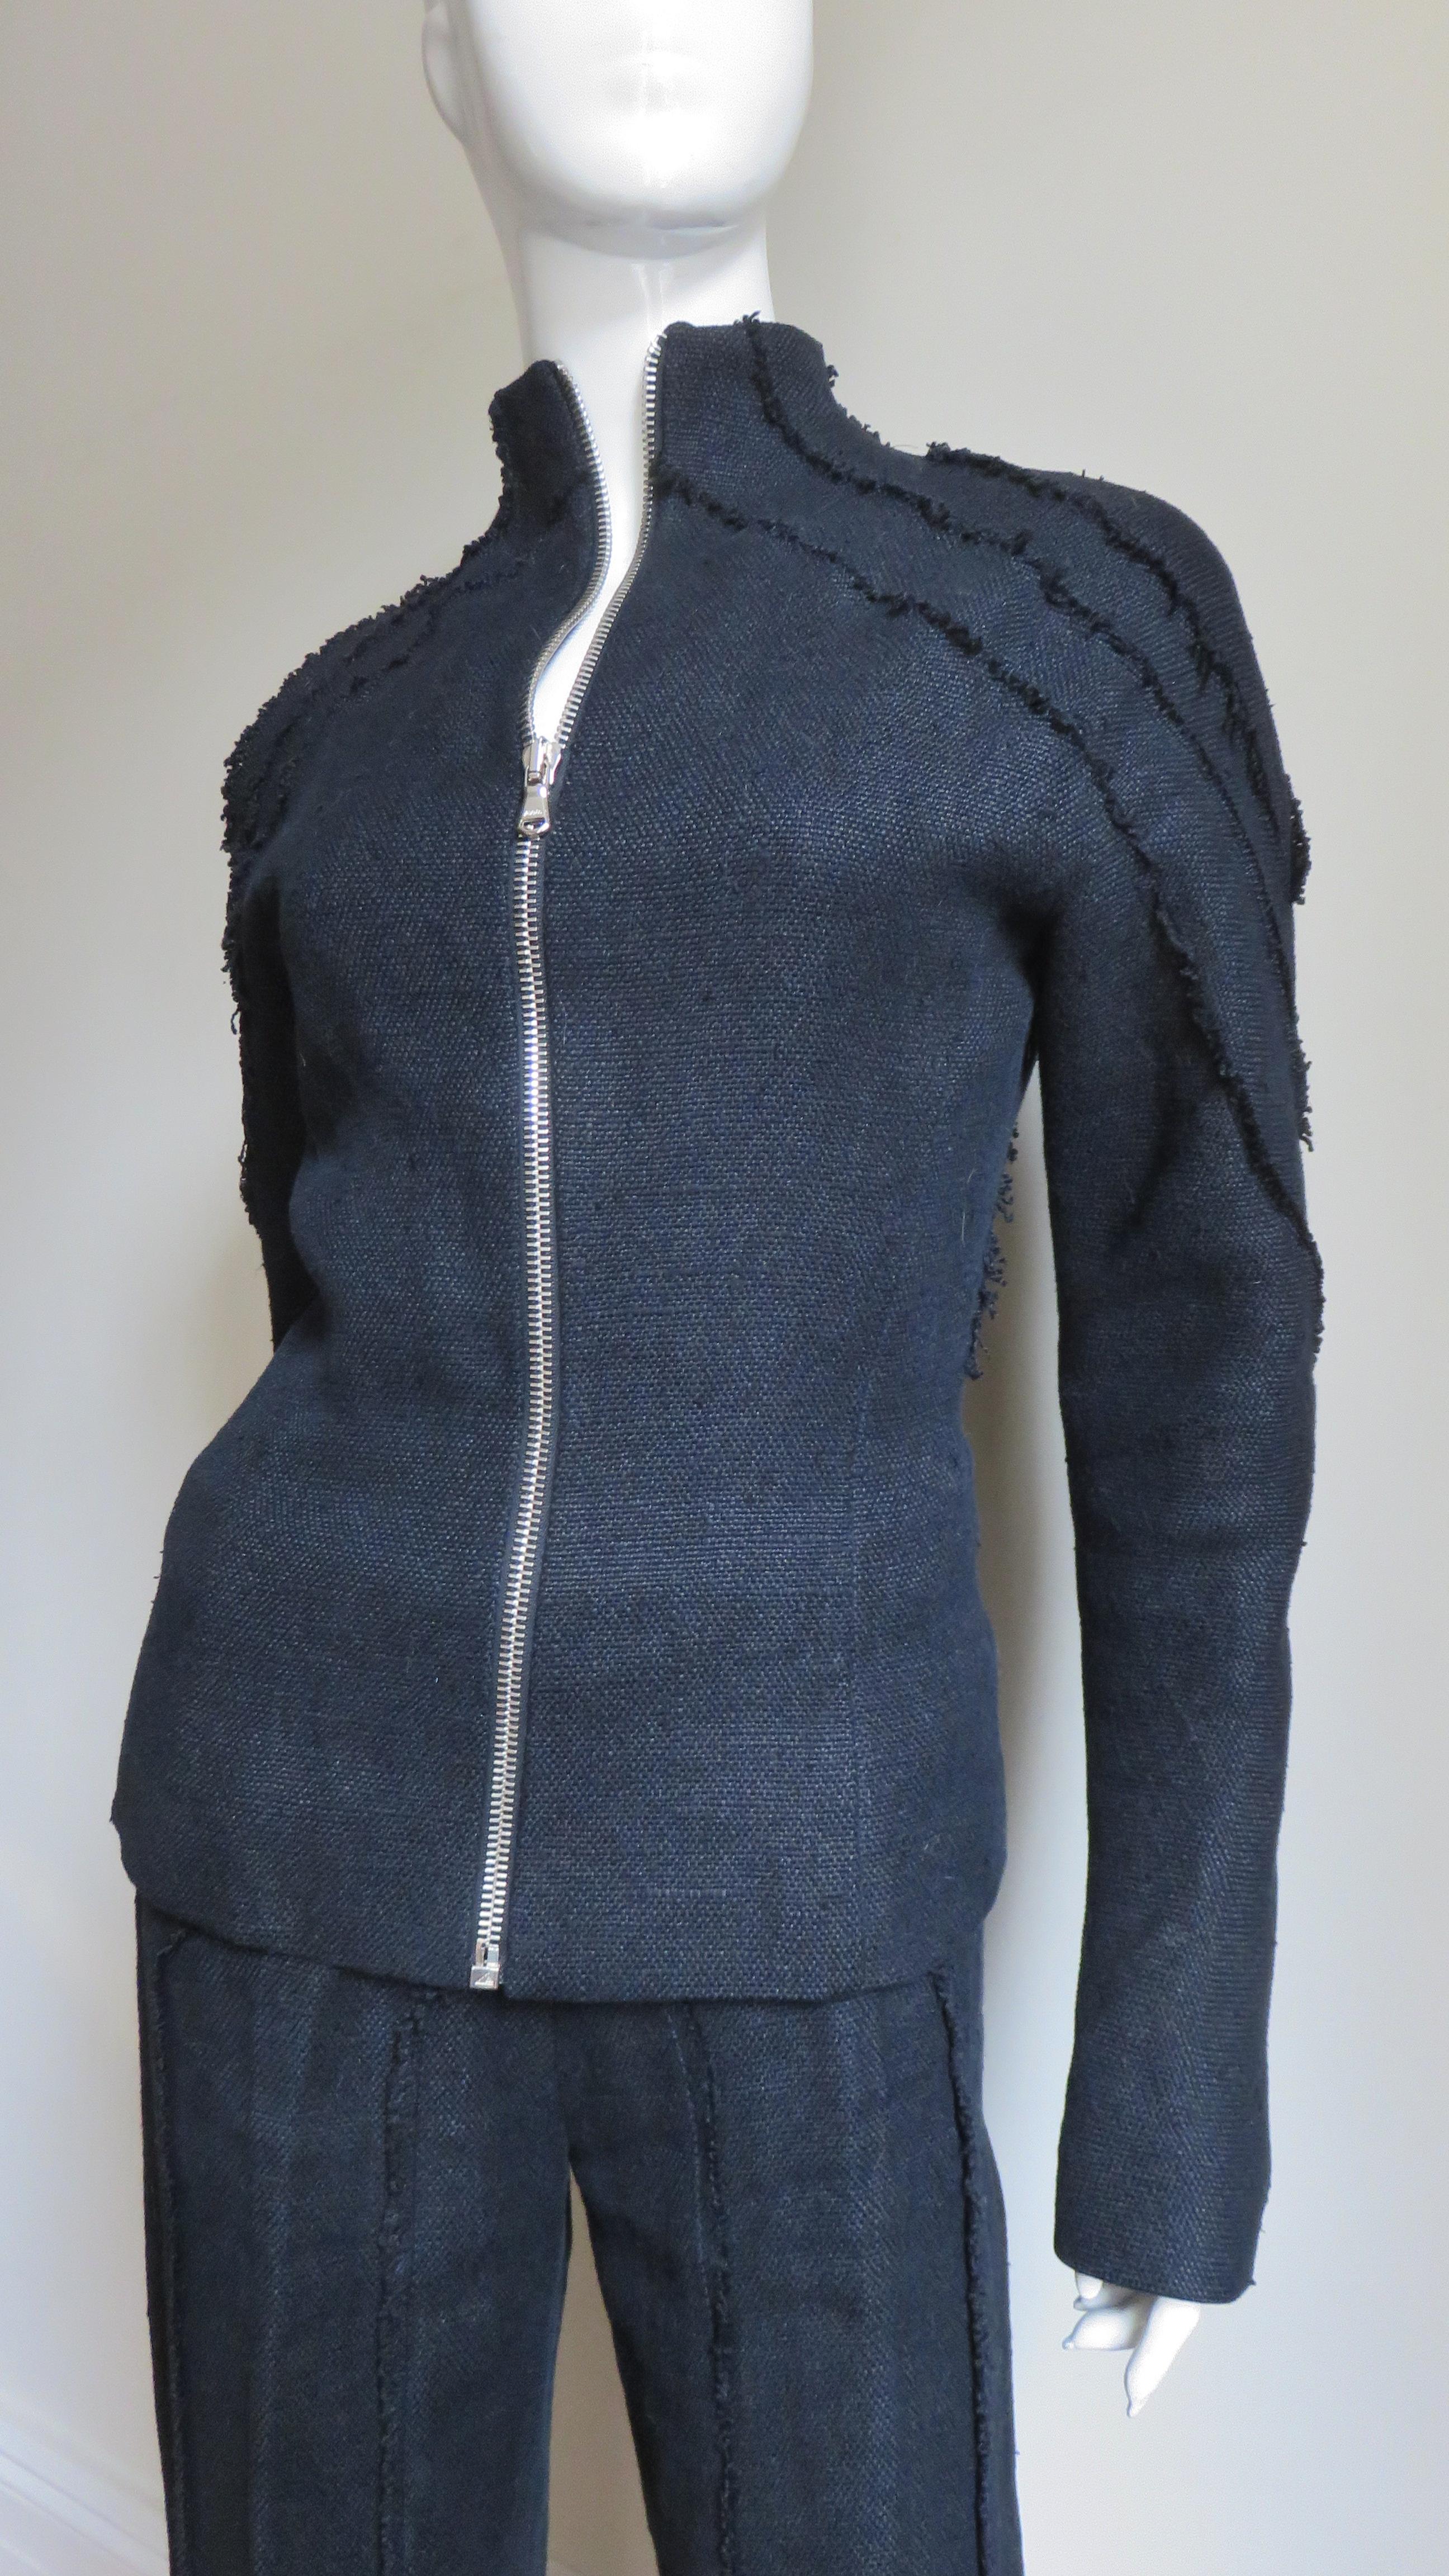 Alexander McQueen New Elaborately Seamed Jacket and Pants A/W 1999 In Excellent Condition For Sale In Water Mill, NY